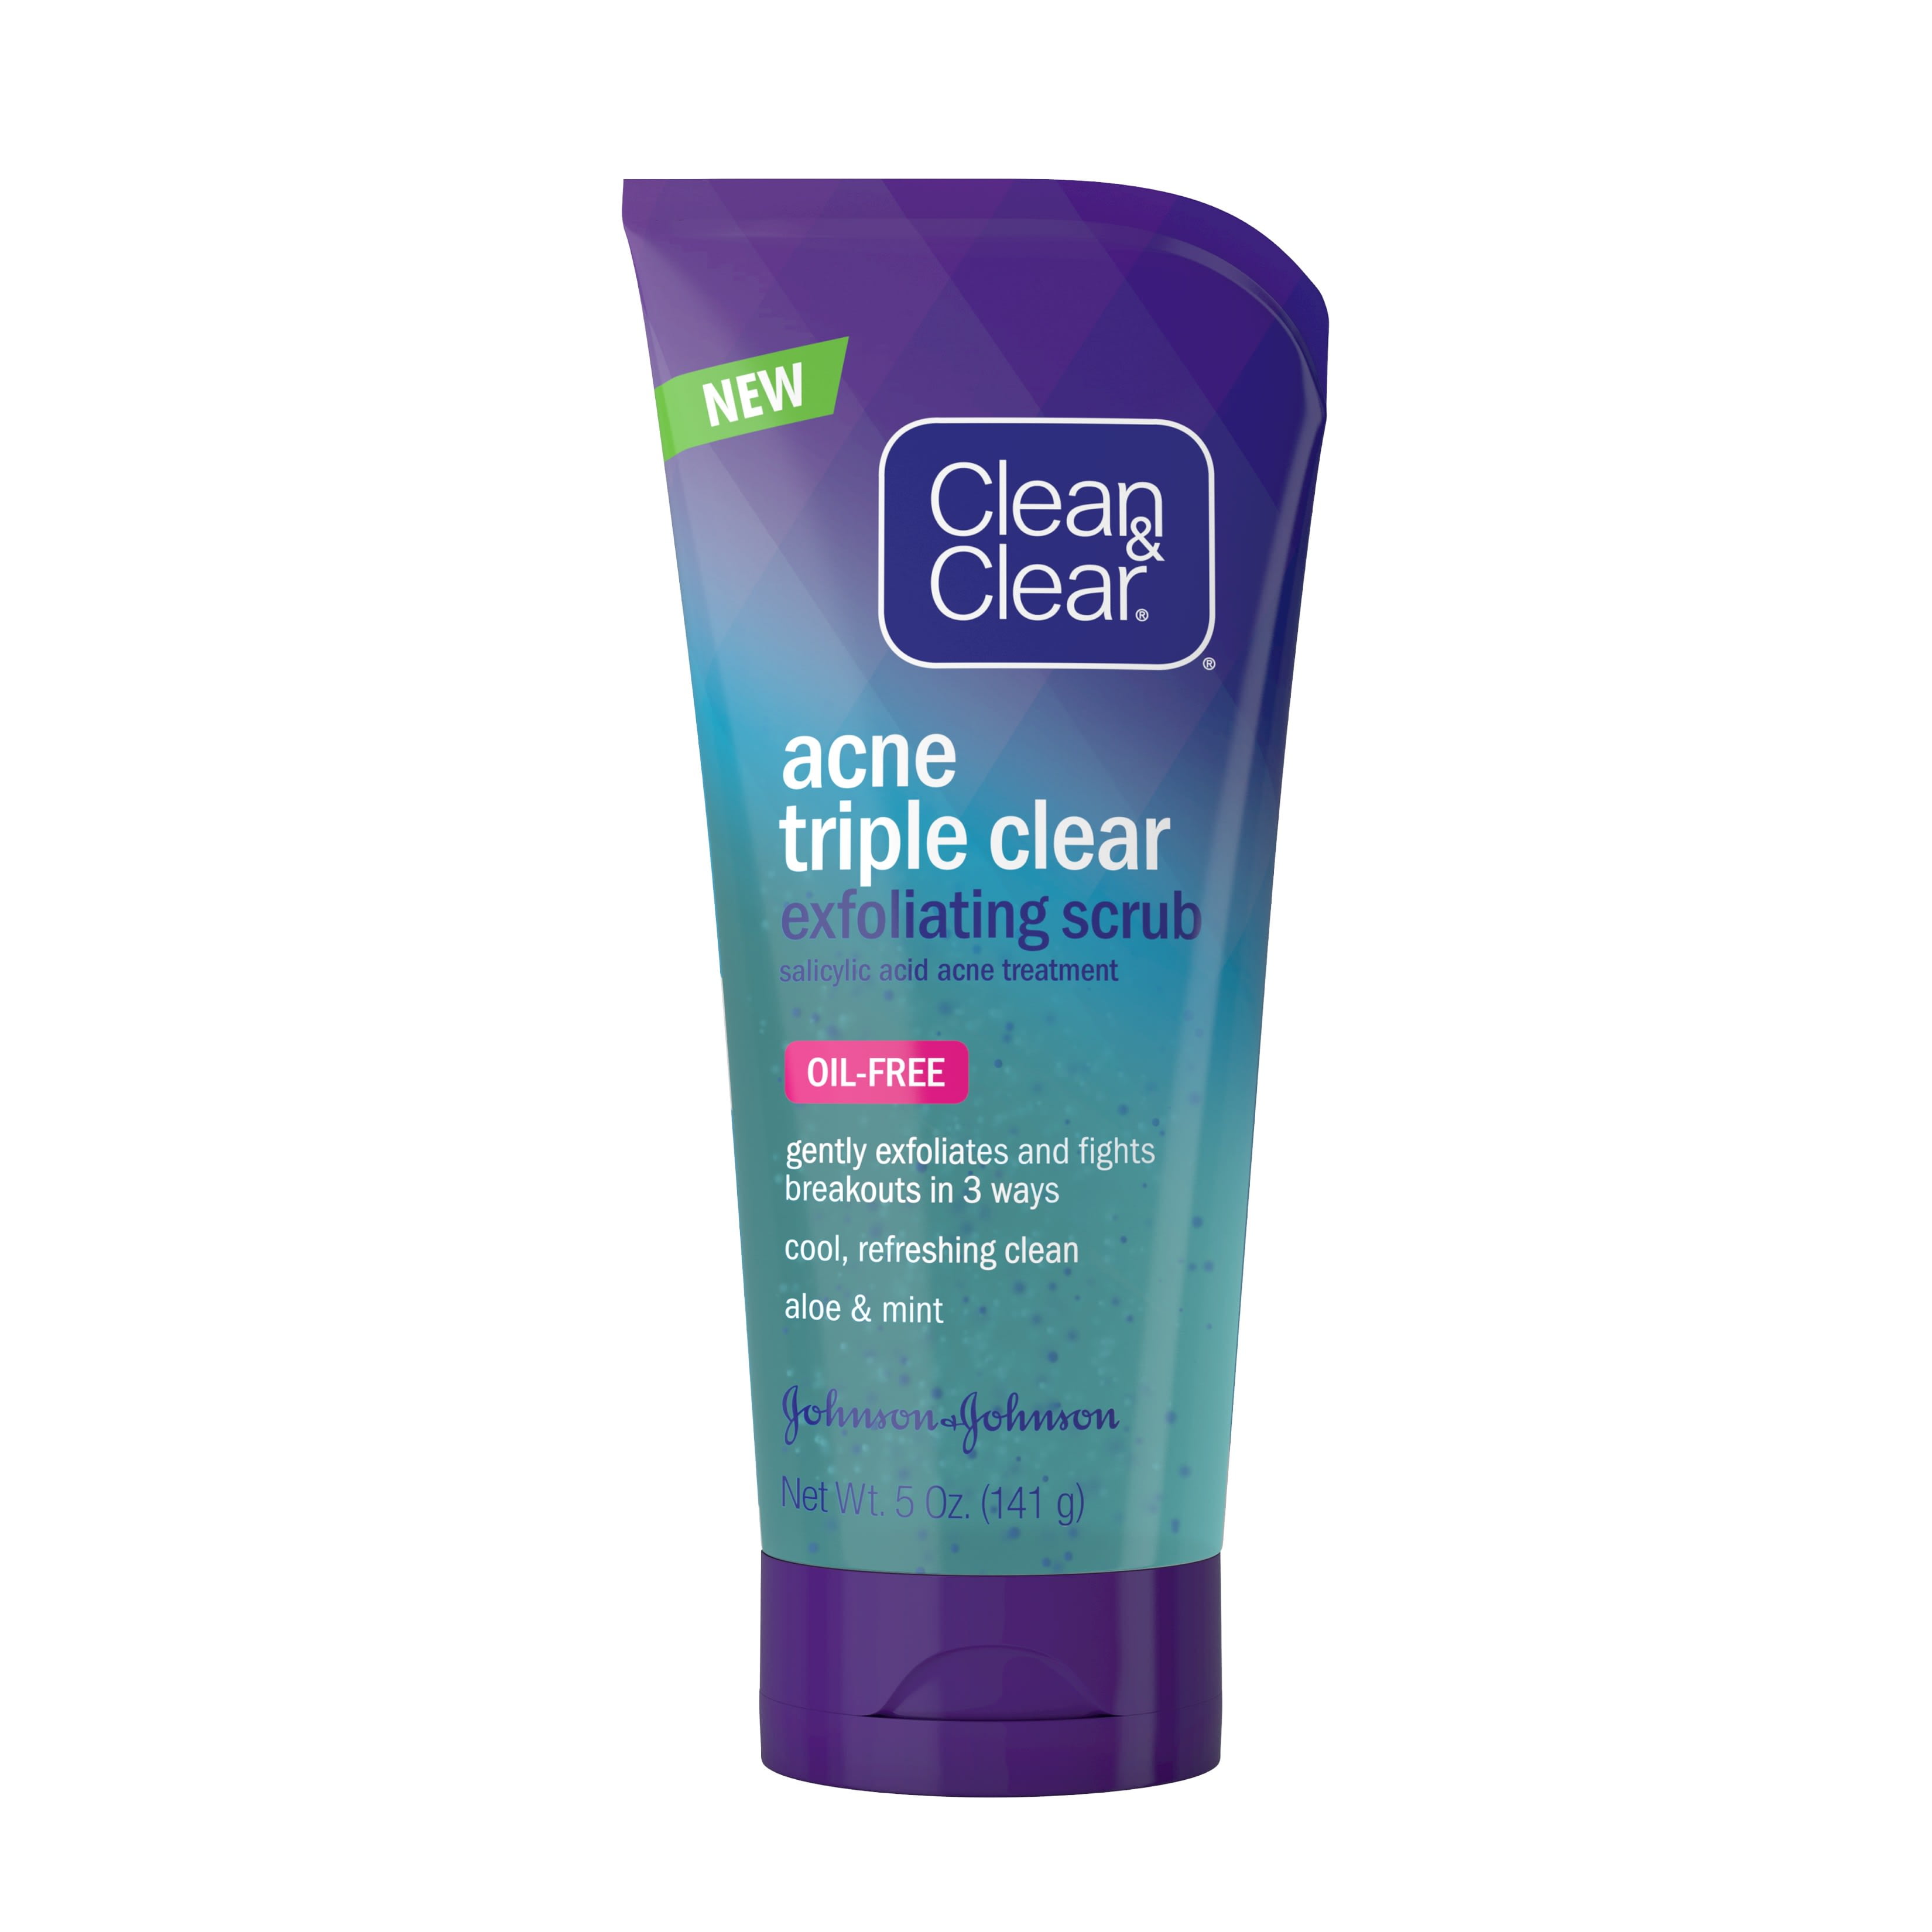 Cleansing scrub. Скраб Клеан клеар. Для лица clean Clear. Скраб acne. Clean Clear от акне.